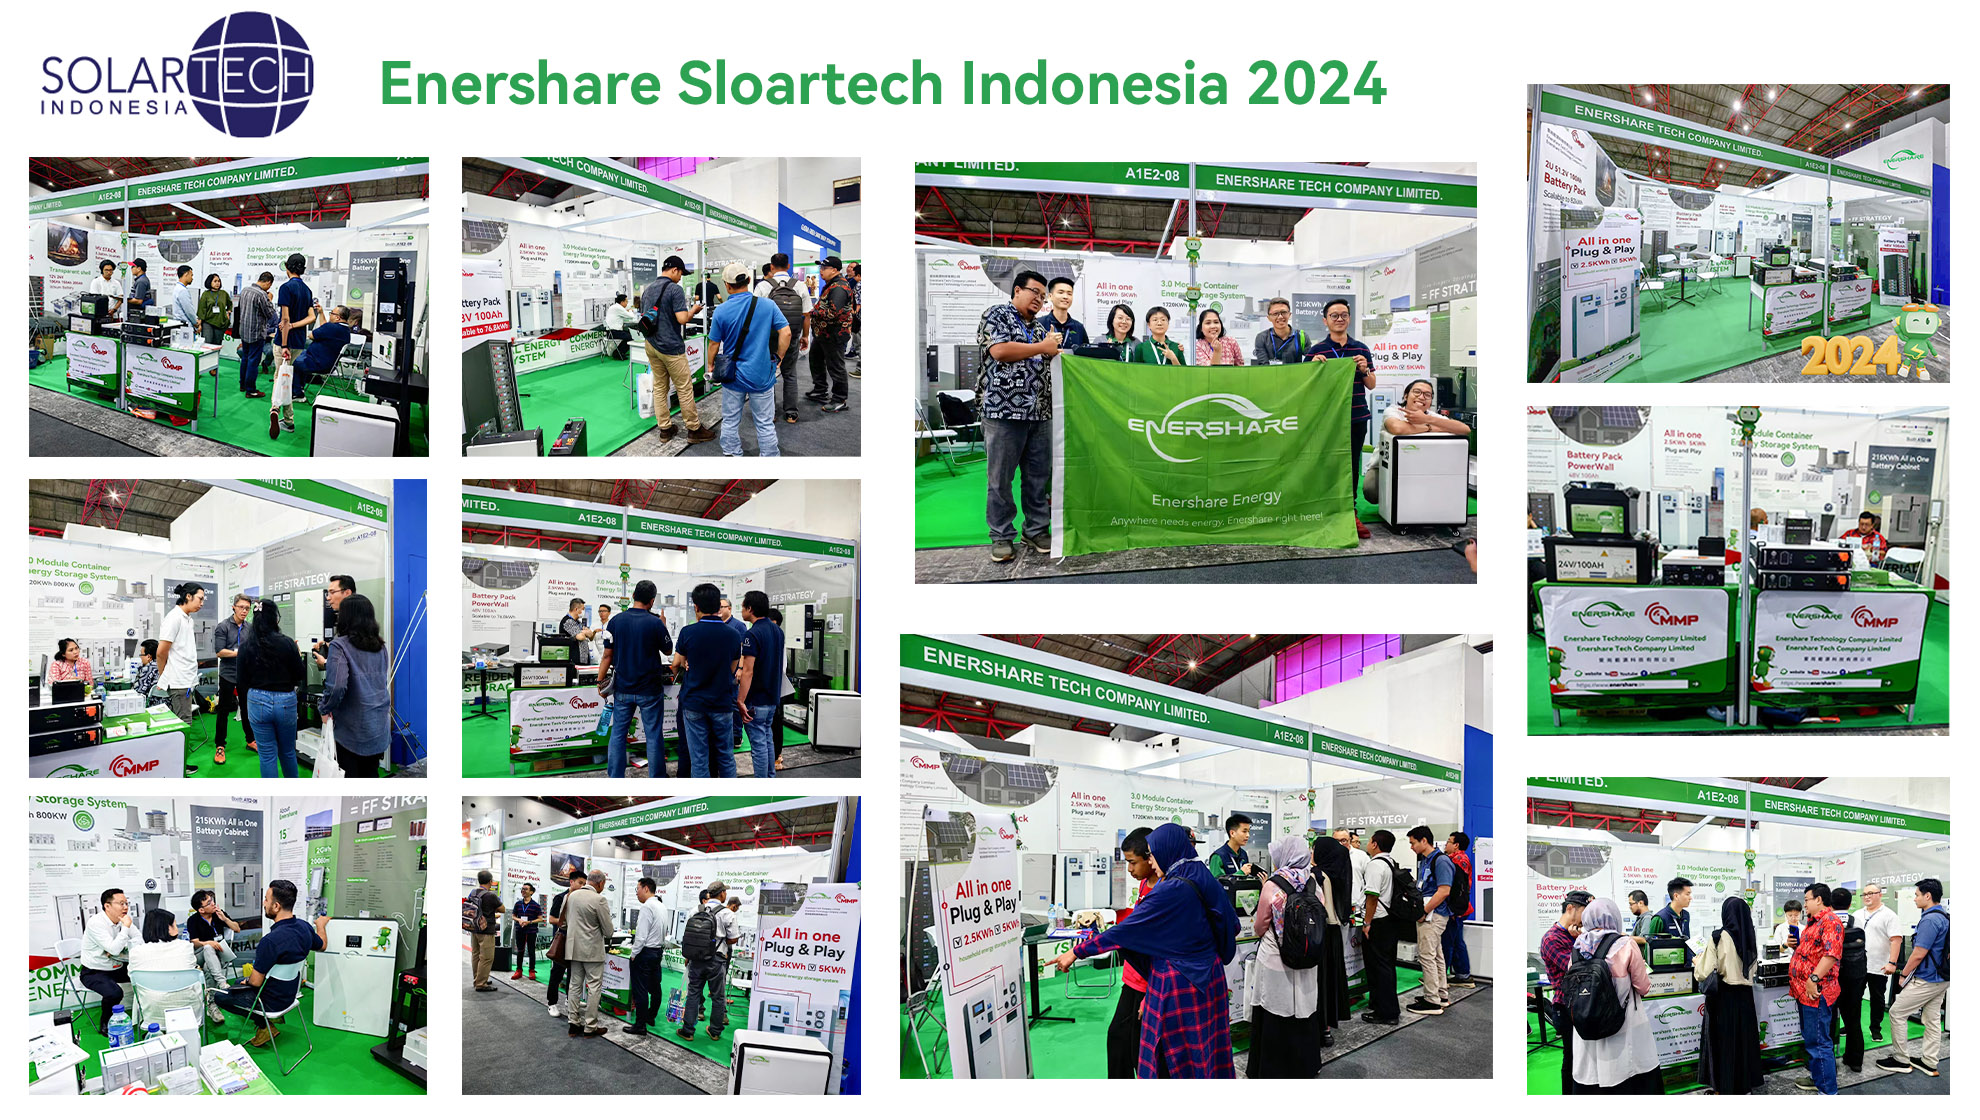 Enershare Solartech 2024 in Indonesia concluded successfully!